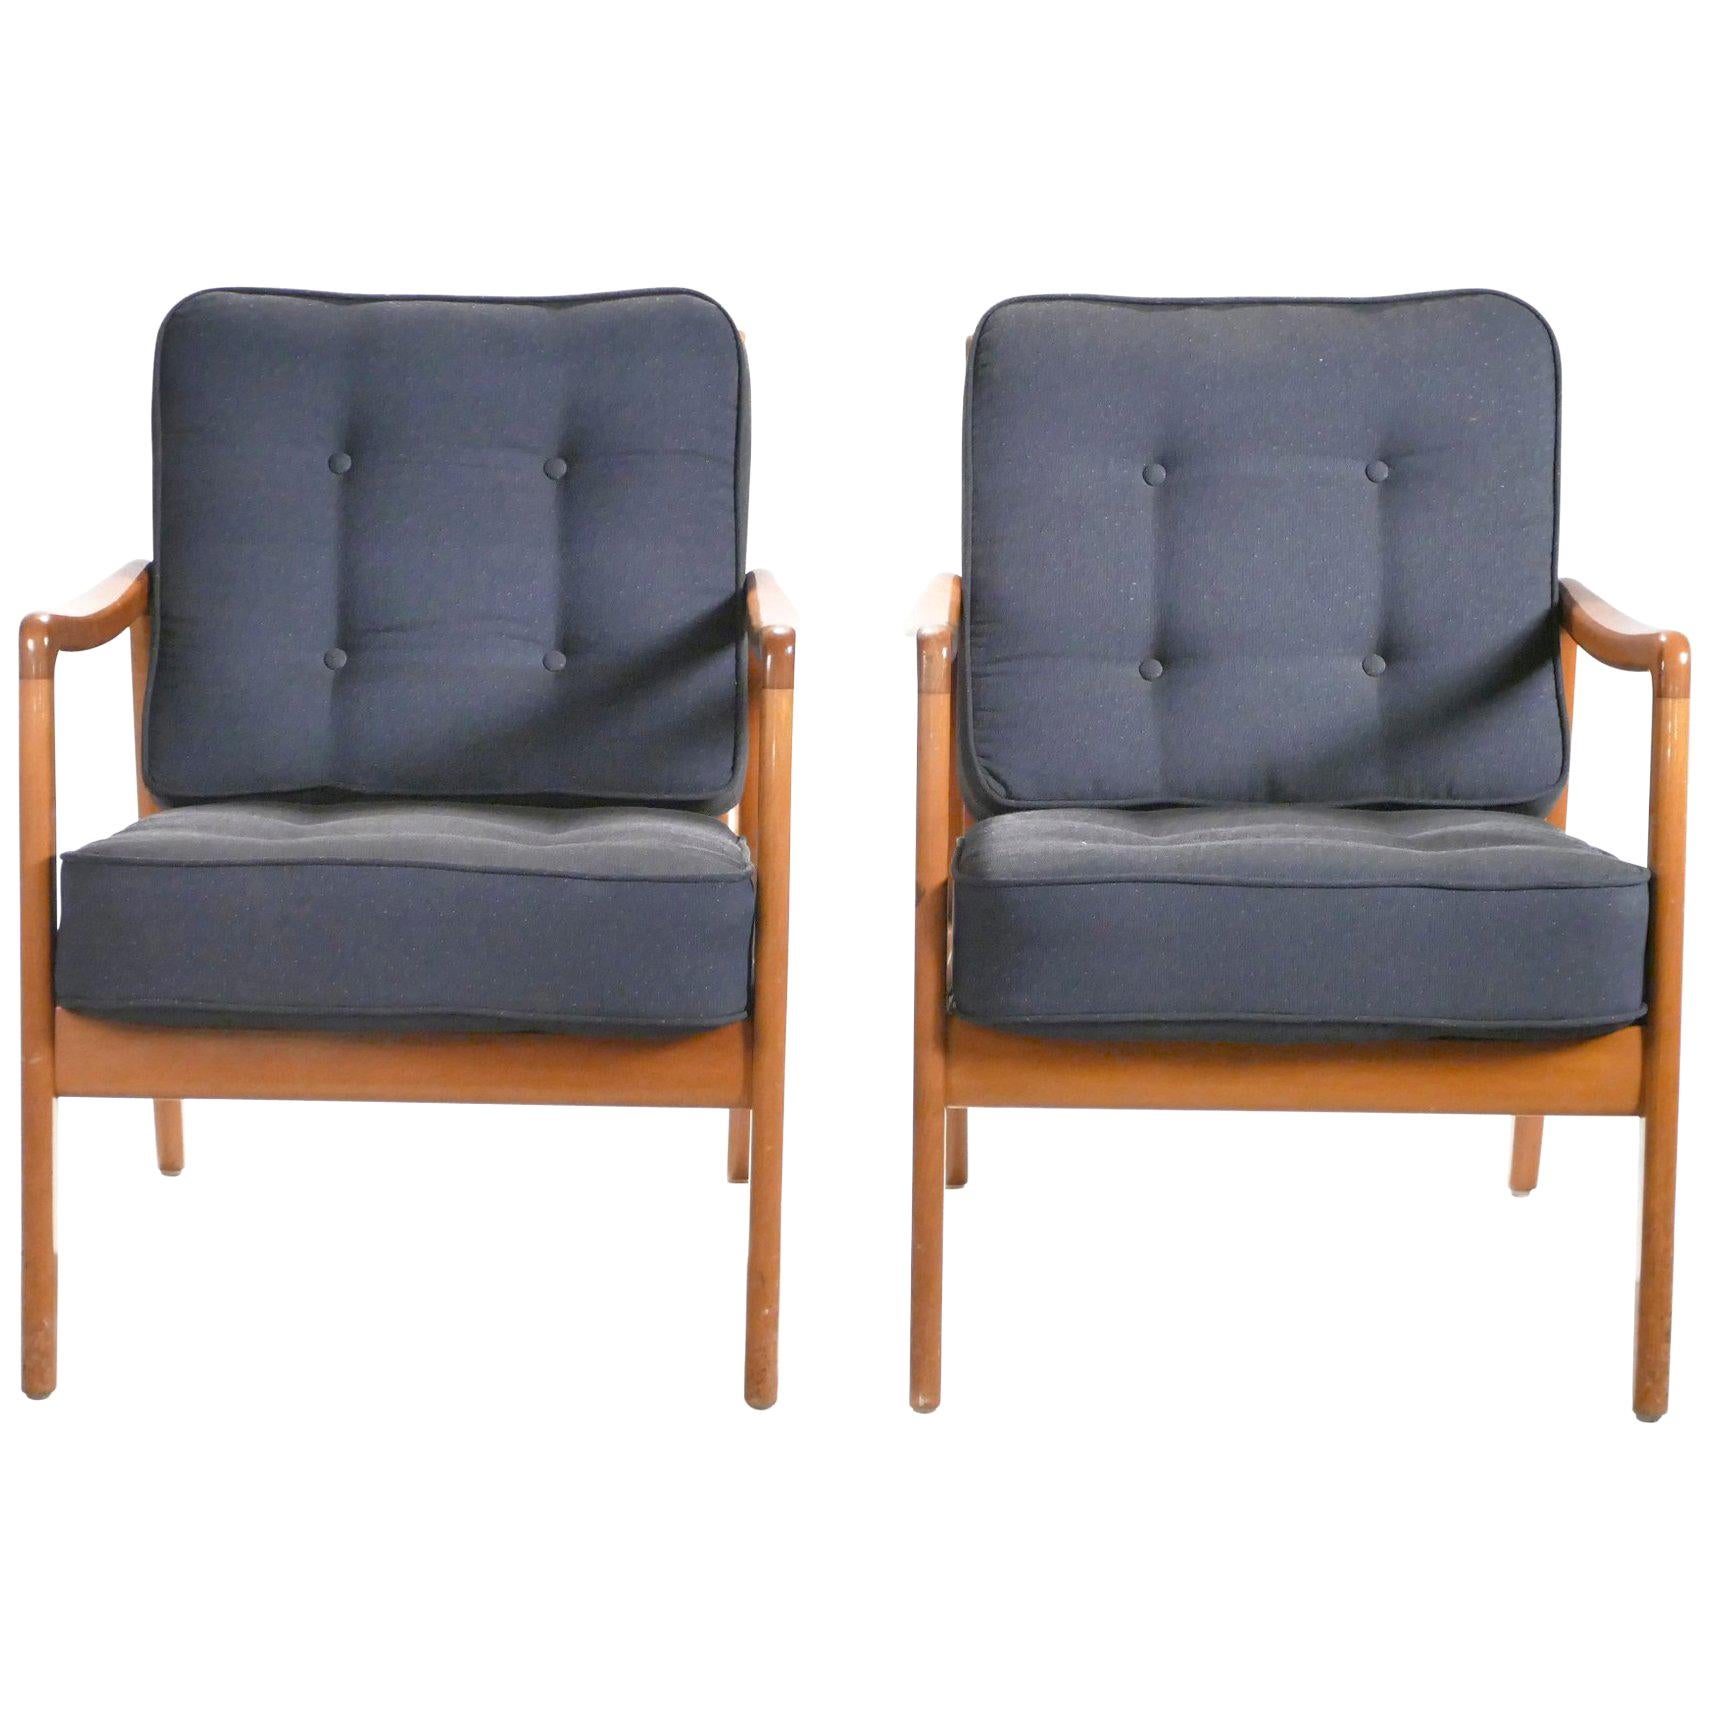 Renowned Danish designer Ole Wanscher is credited for being influential during the height of the acclaimed Scandinavian design movement that took place during the midcentury. His FD109 armchairs, designed during the 1960s for respected Danish